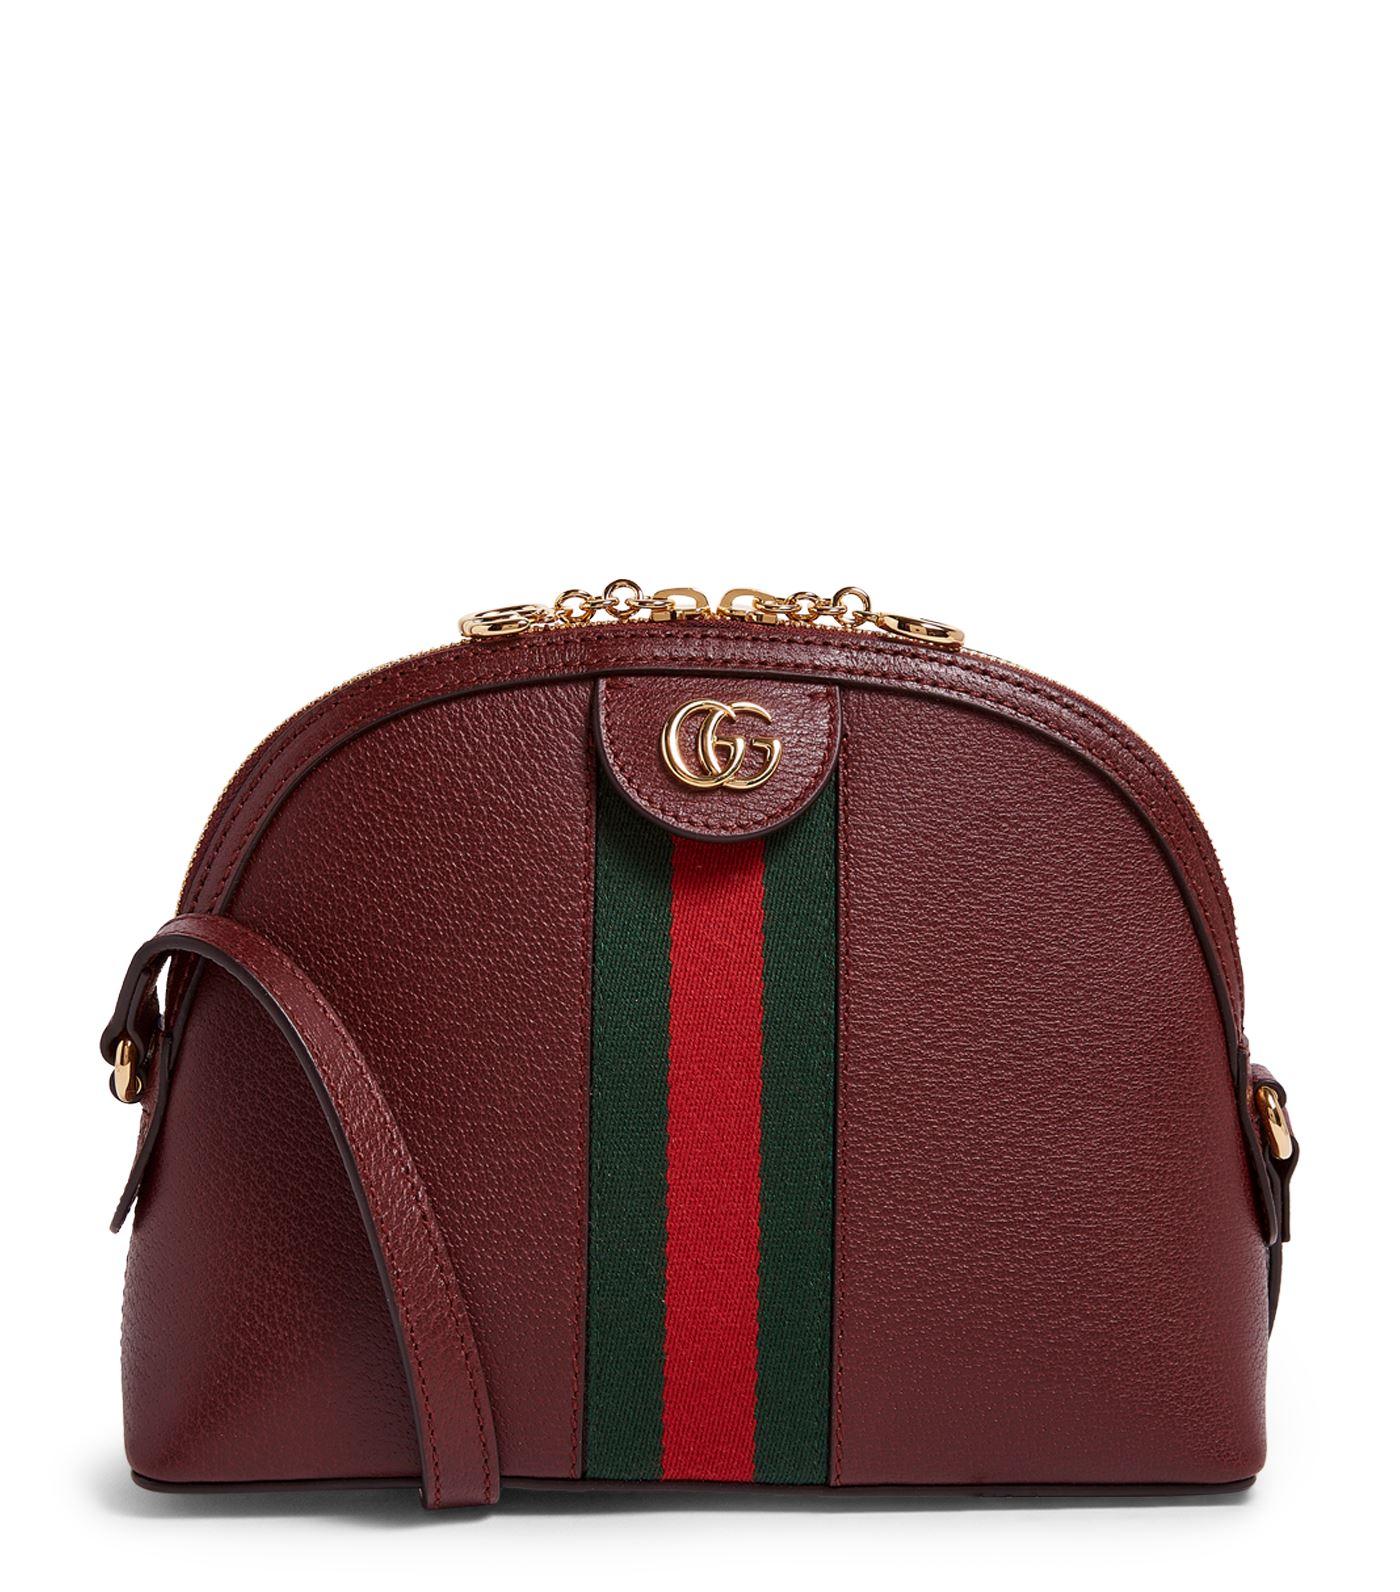 Gucci Small Leather Ophidia Shoulder Bag in Brown - Lyst